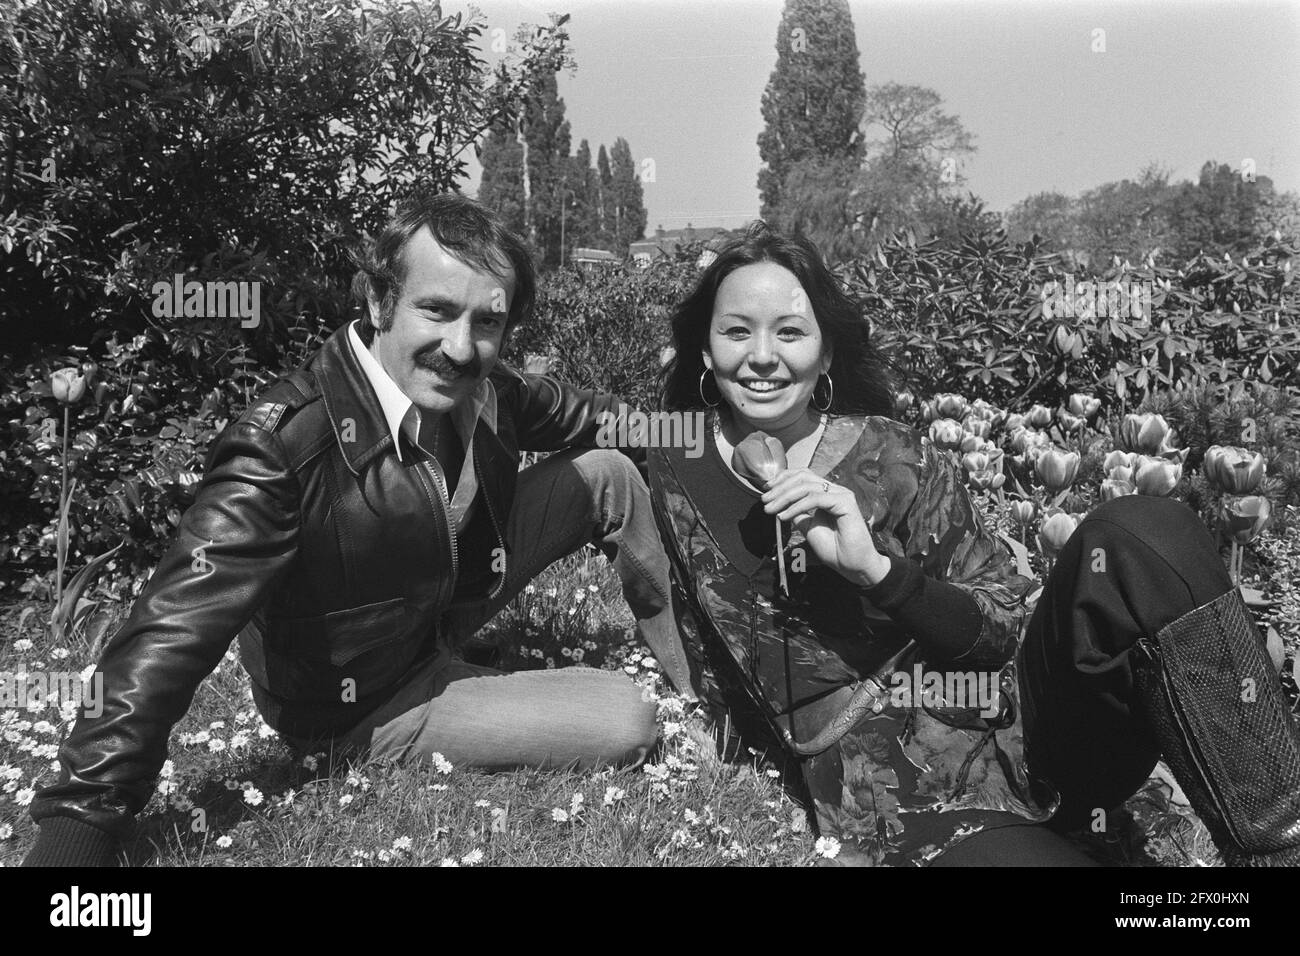 Yvonne Elliman (singer) and producer Robert Stigwood, May 18, 1977, producers, singers, The Netherlands, 20th century press agency photo, news to remember, documentary, historic photography 1945-1990, visual stories, human history of the Twentieth Century, capturing moments in time Stock Photo